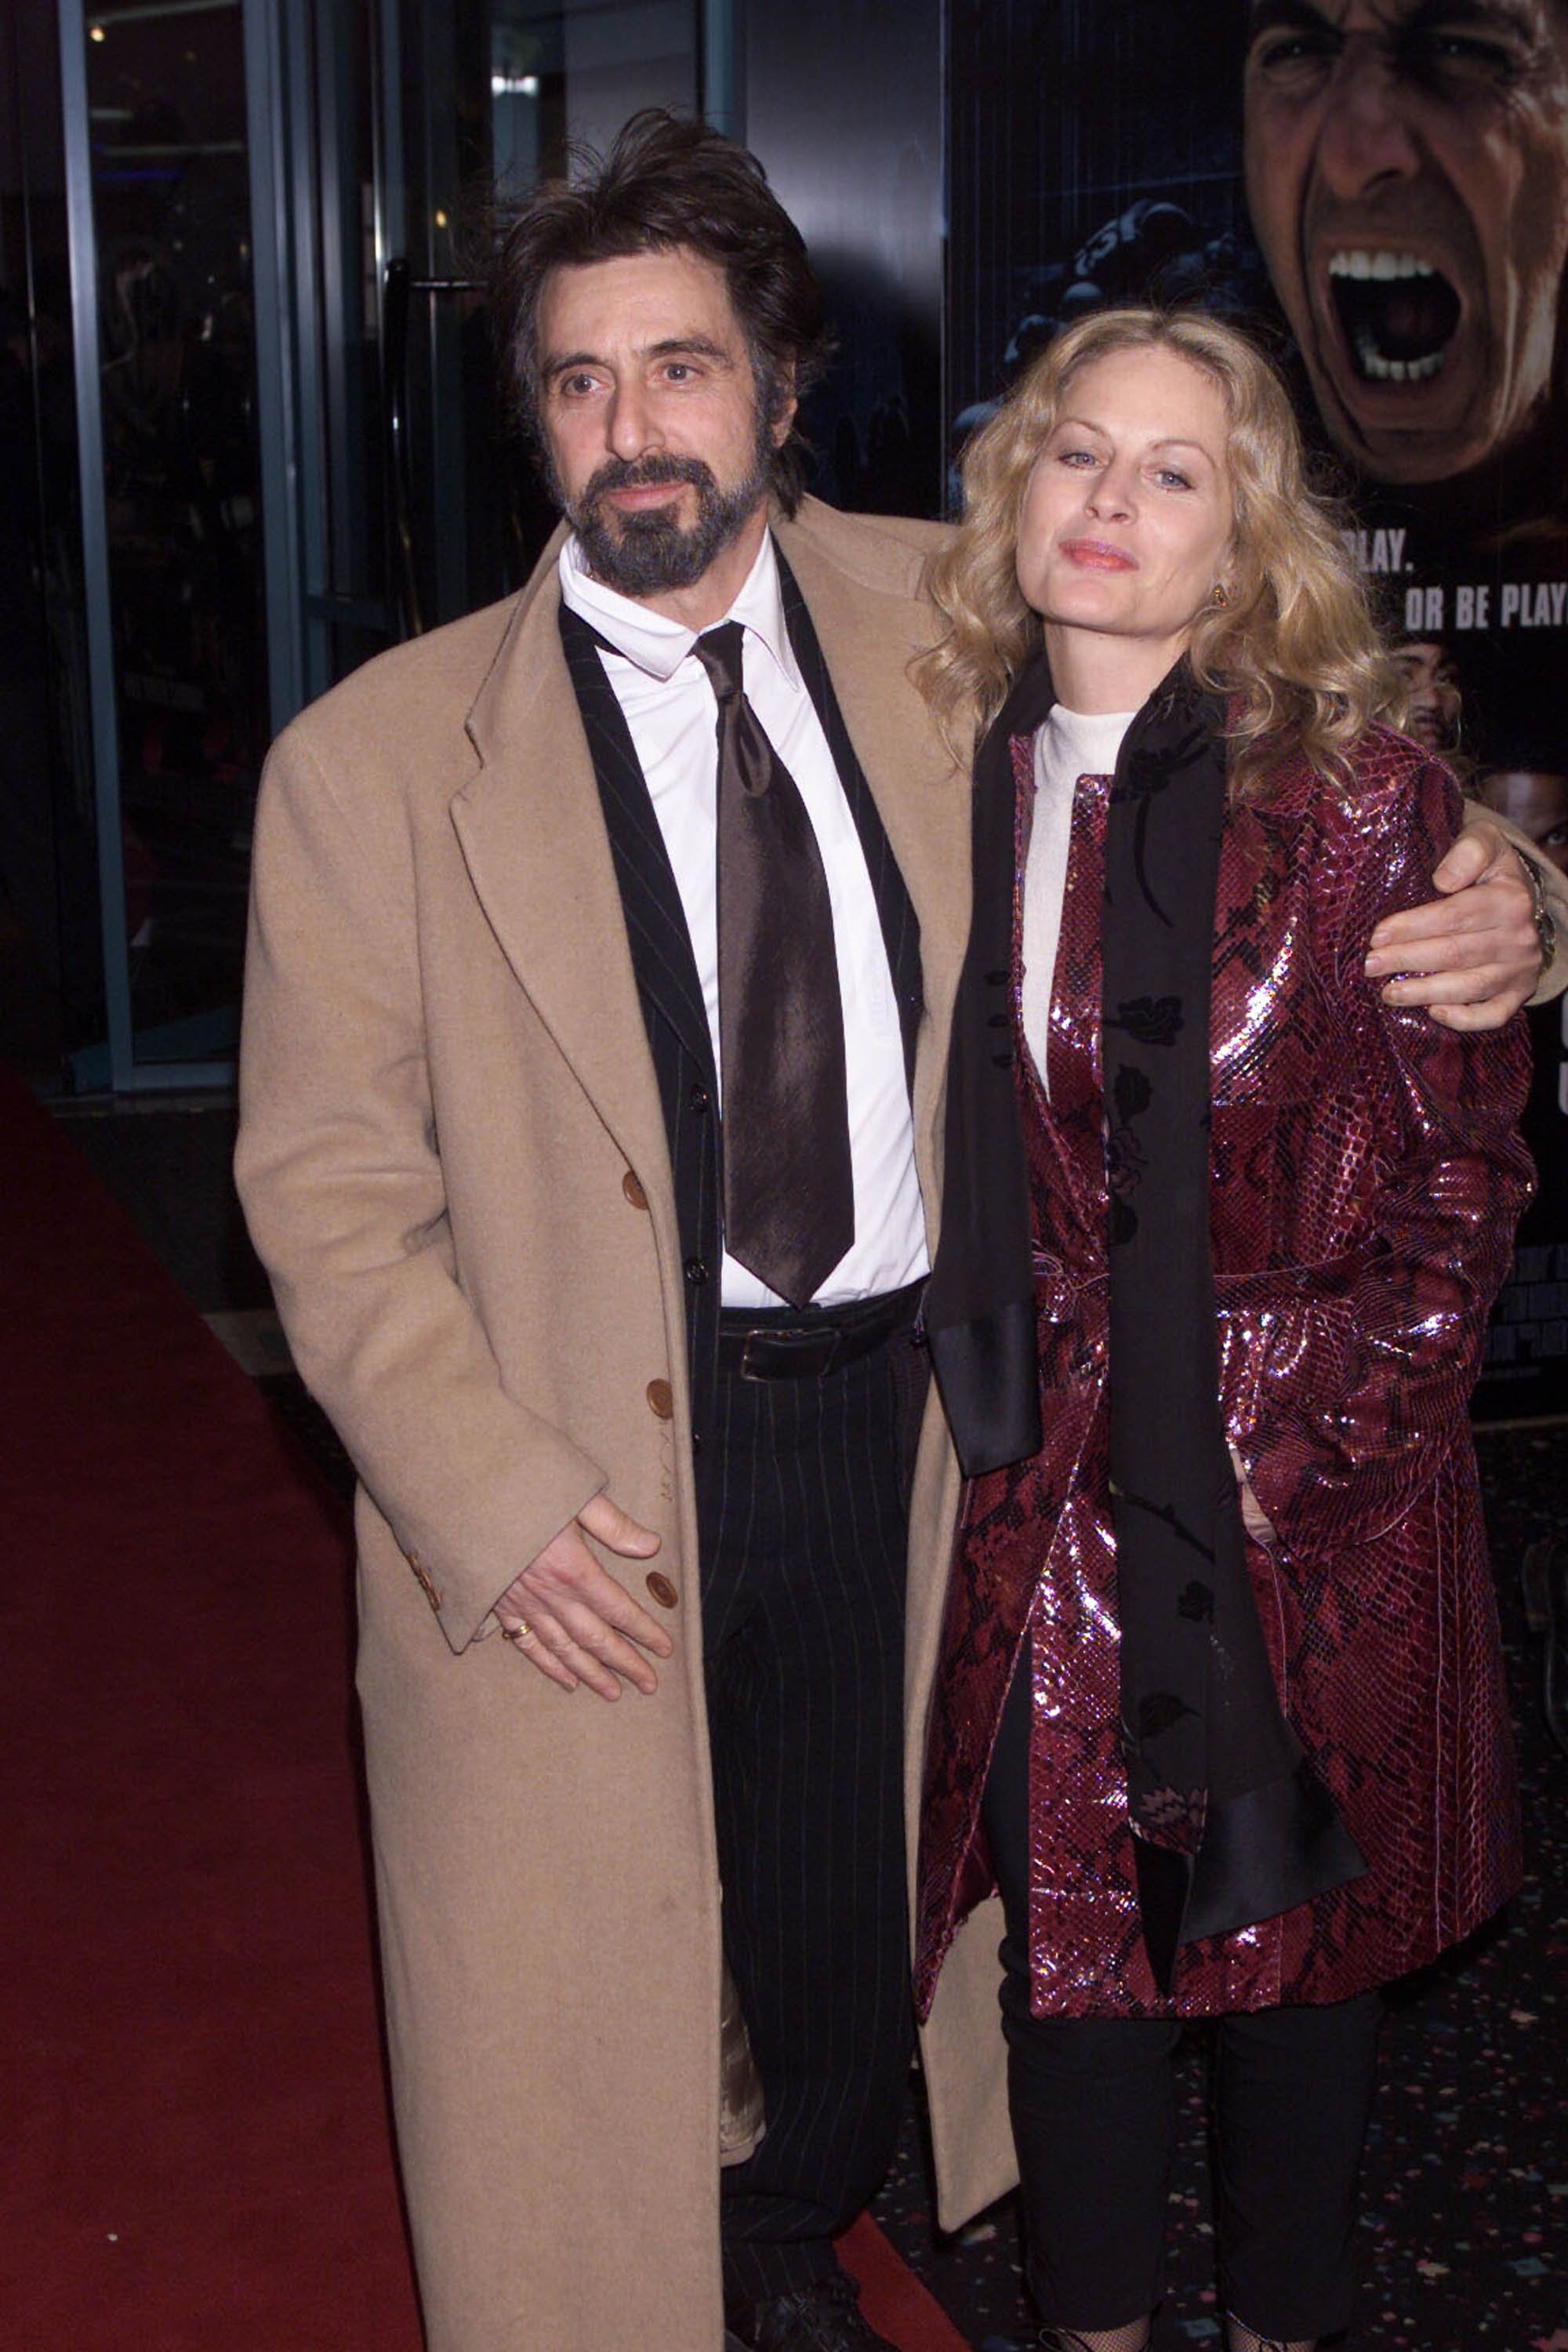 Al Pacino and Beverley D'Angelo arrive at the UK premiere of the film "Any Given Sunday" on March 29, 2000 in London | Source: Getty Images